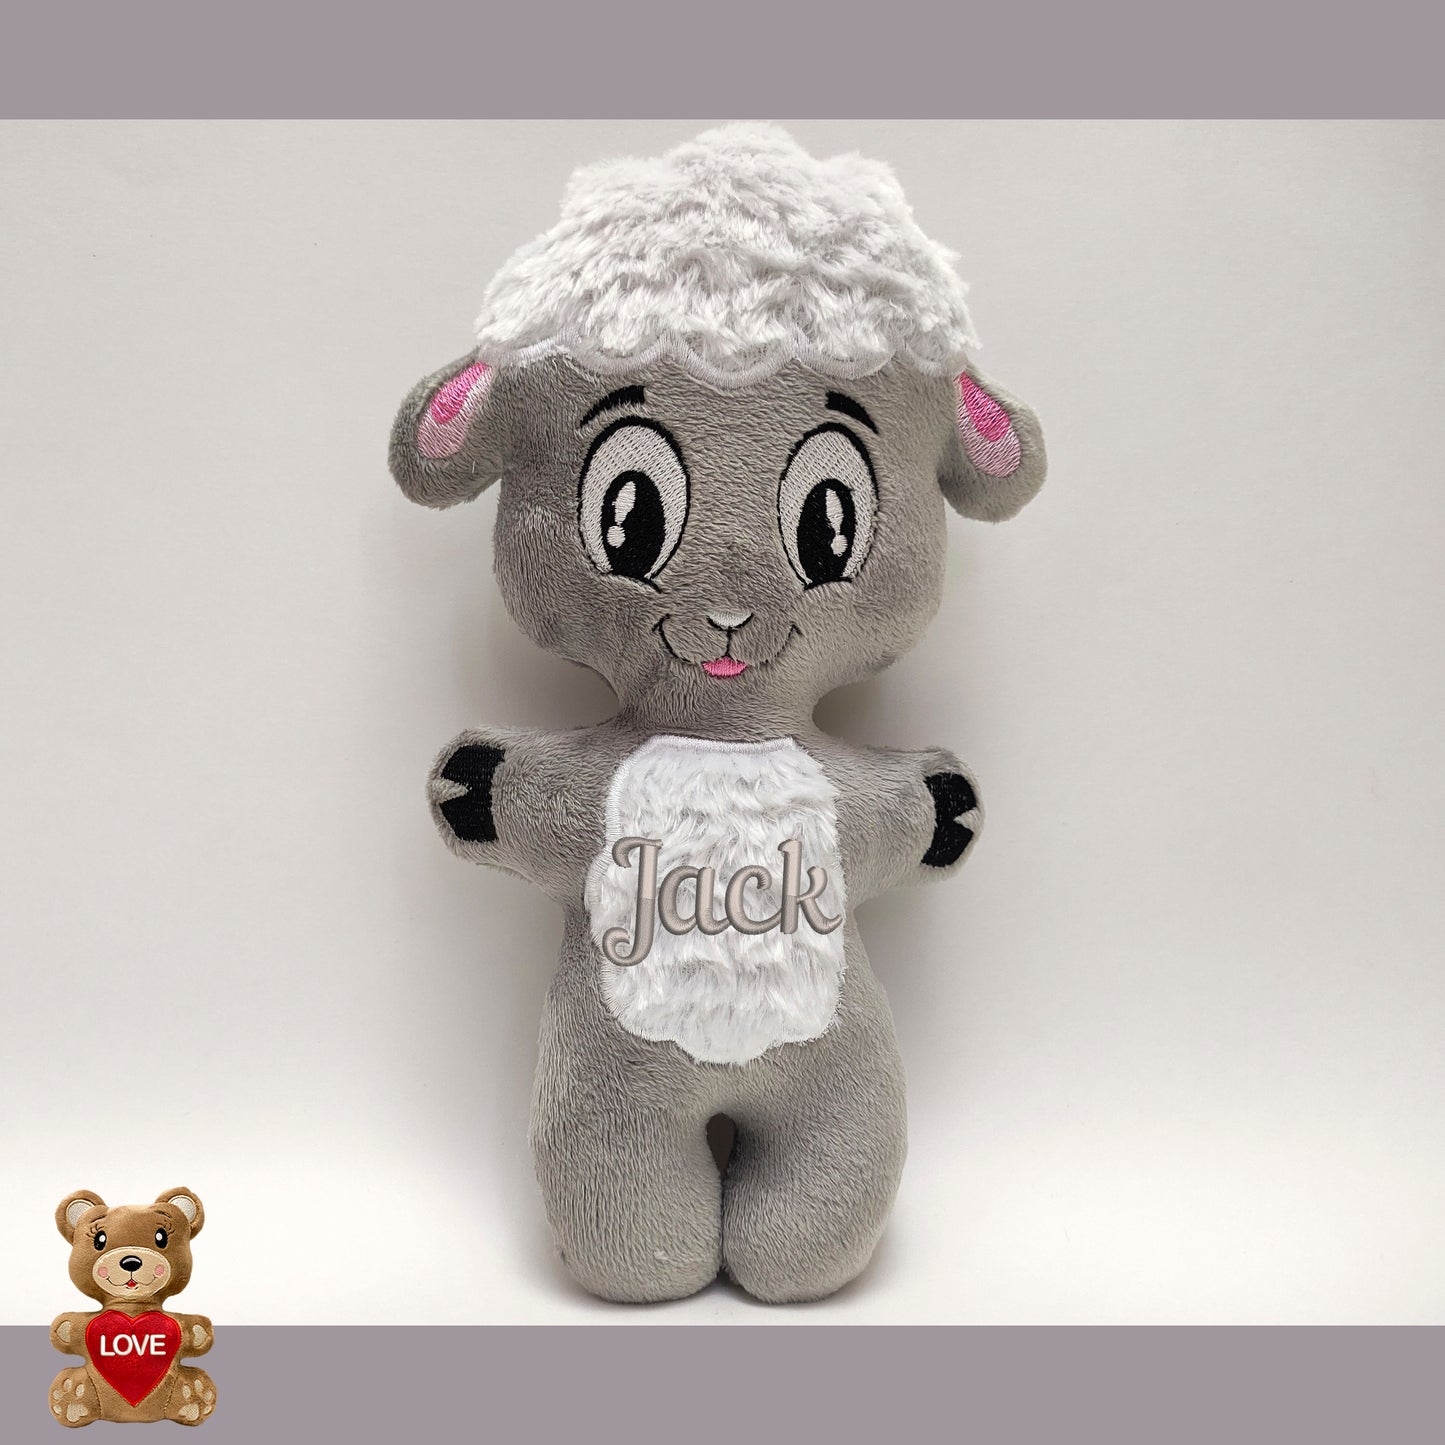 Personalised Easter Sheep Stuffed ToyPersonalised Easter Sheep Stuffed Toy ,Super cute personalised soft plush toy, Personalised Gift, Unique Personalized Birthday Gifts , Custom Gifts For Children